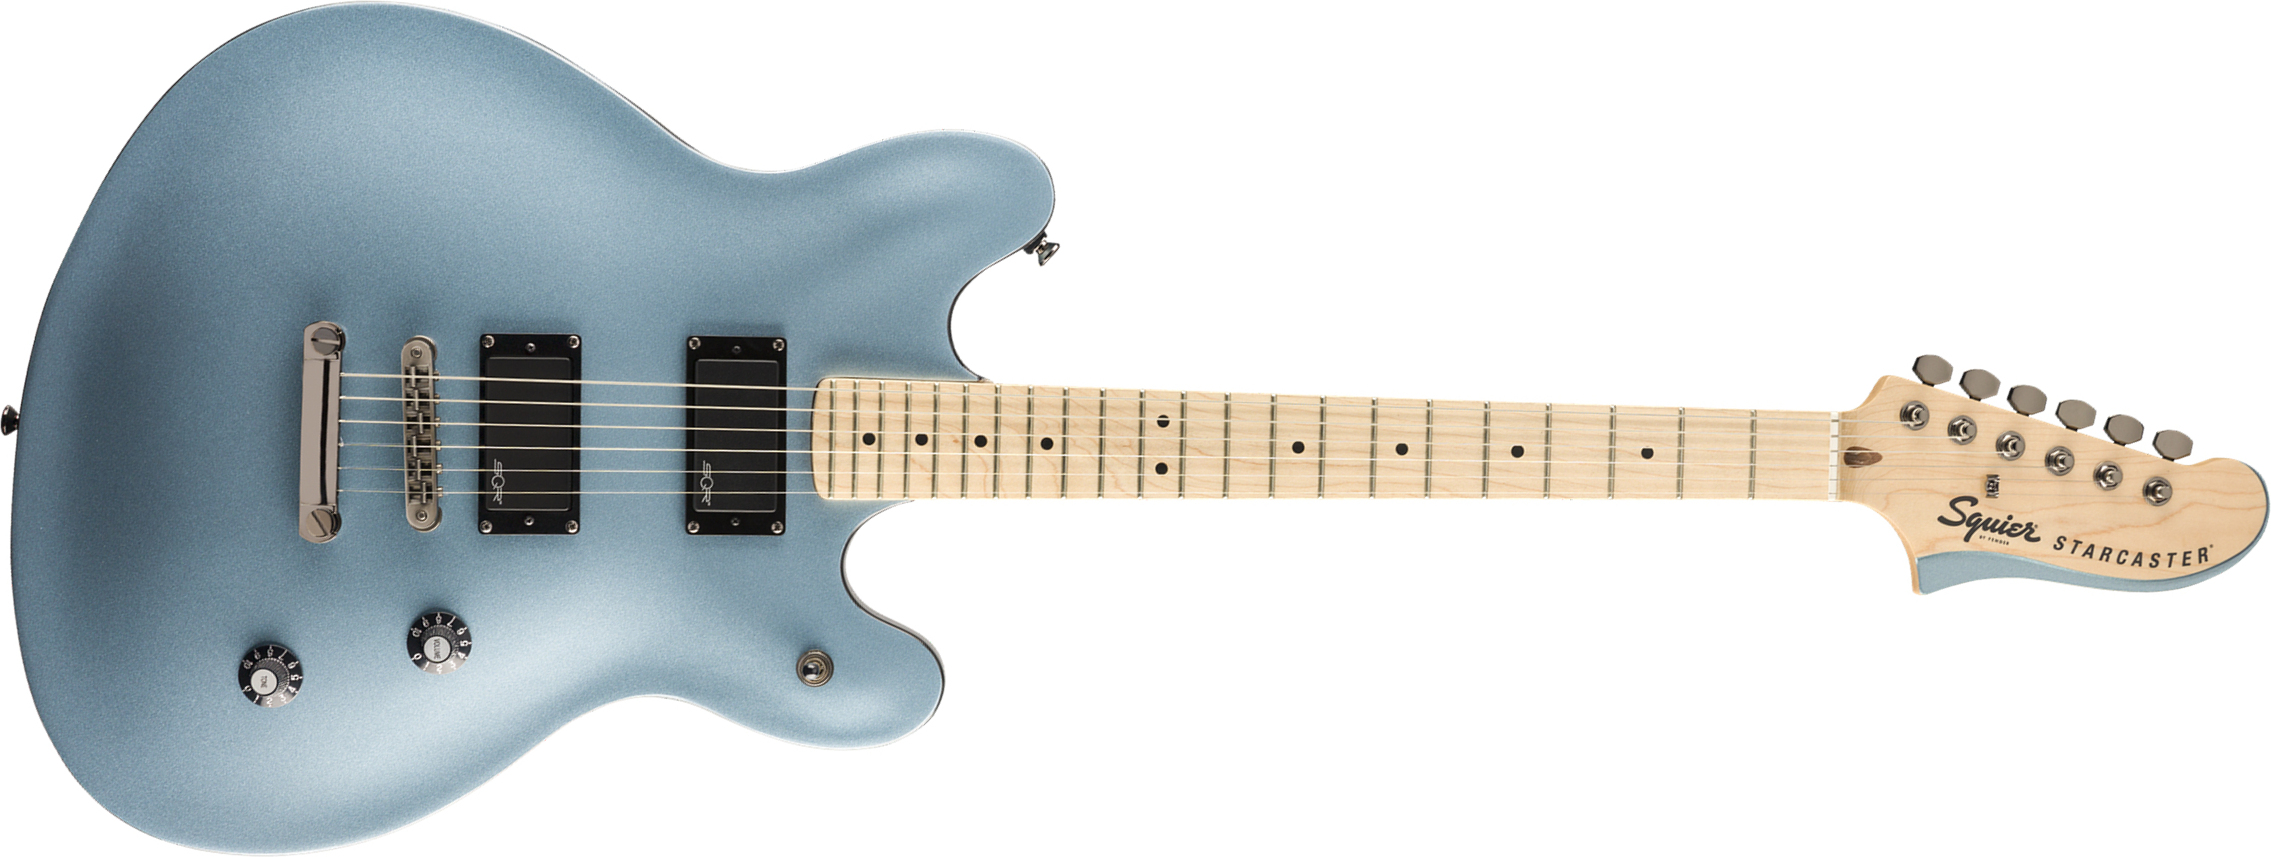 Squier Starcaster Contemporary Active Starcaster 2019 Hh Ht Mn - Ice Blue Metallic - Retro rock electric guitar - Main picture